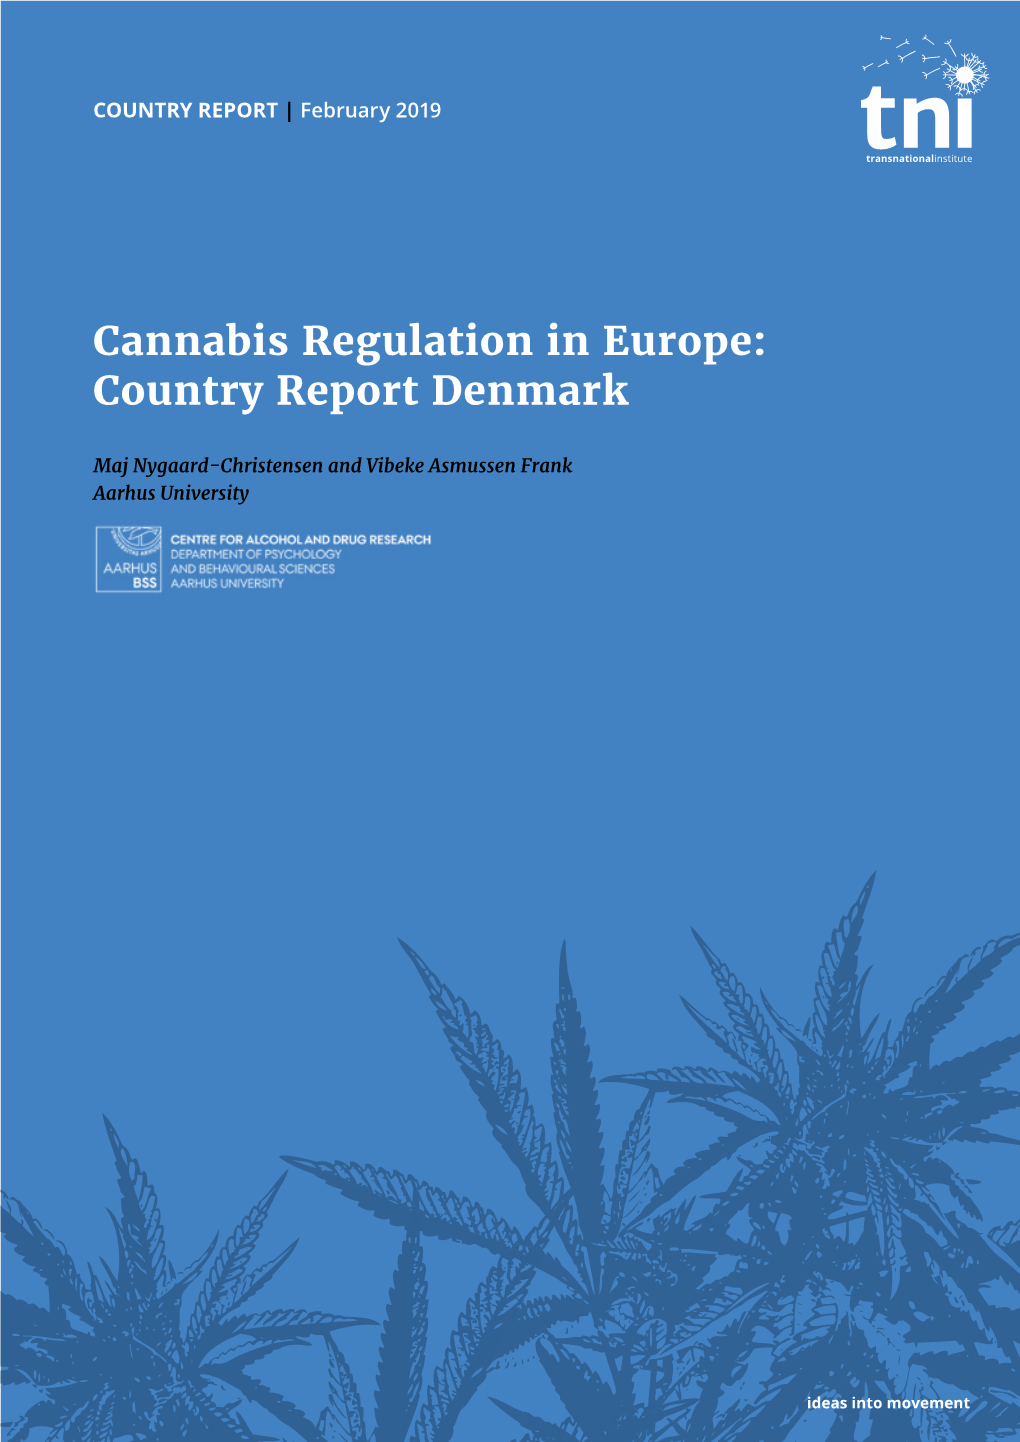 Cannabis Regulation in Europe: Country Report Denmark